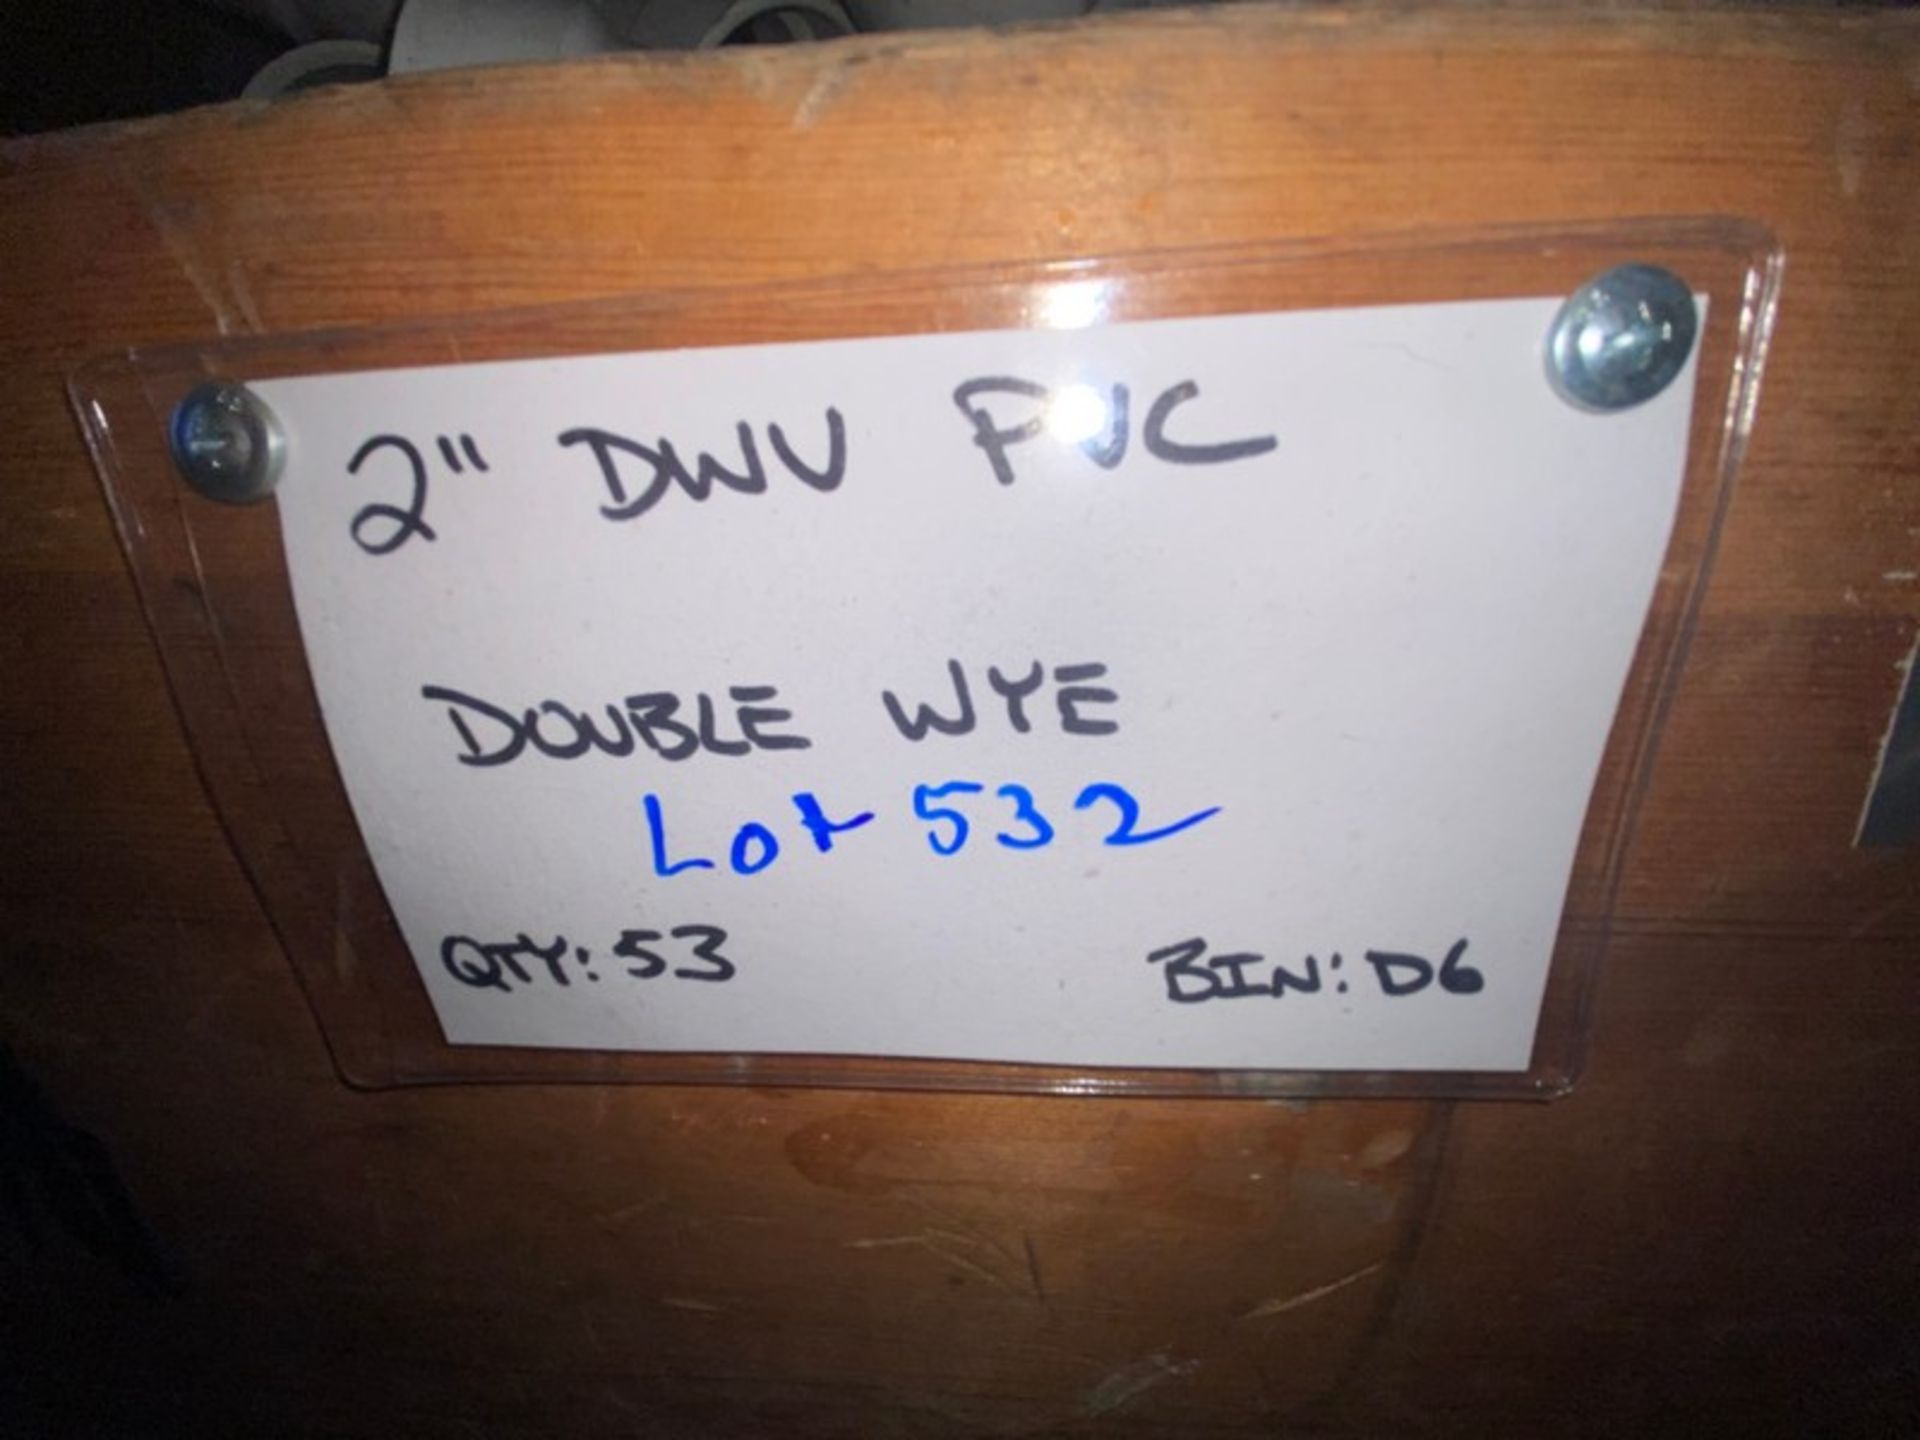 (53) 2” DWV PVC DOUBLE WYE (Bin:D6) (LOCATED IN MONROEVILLE, PA) - Image 4 of 4